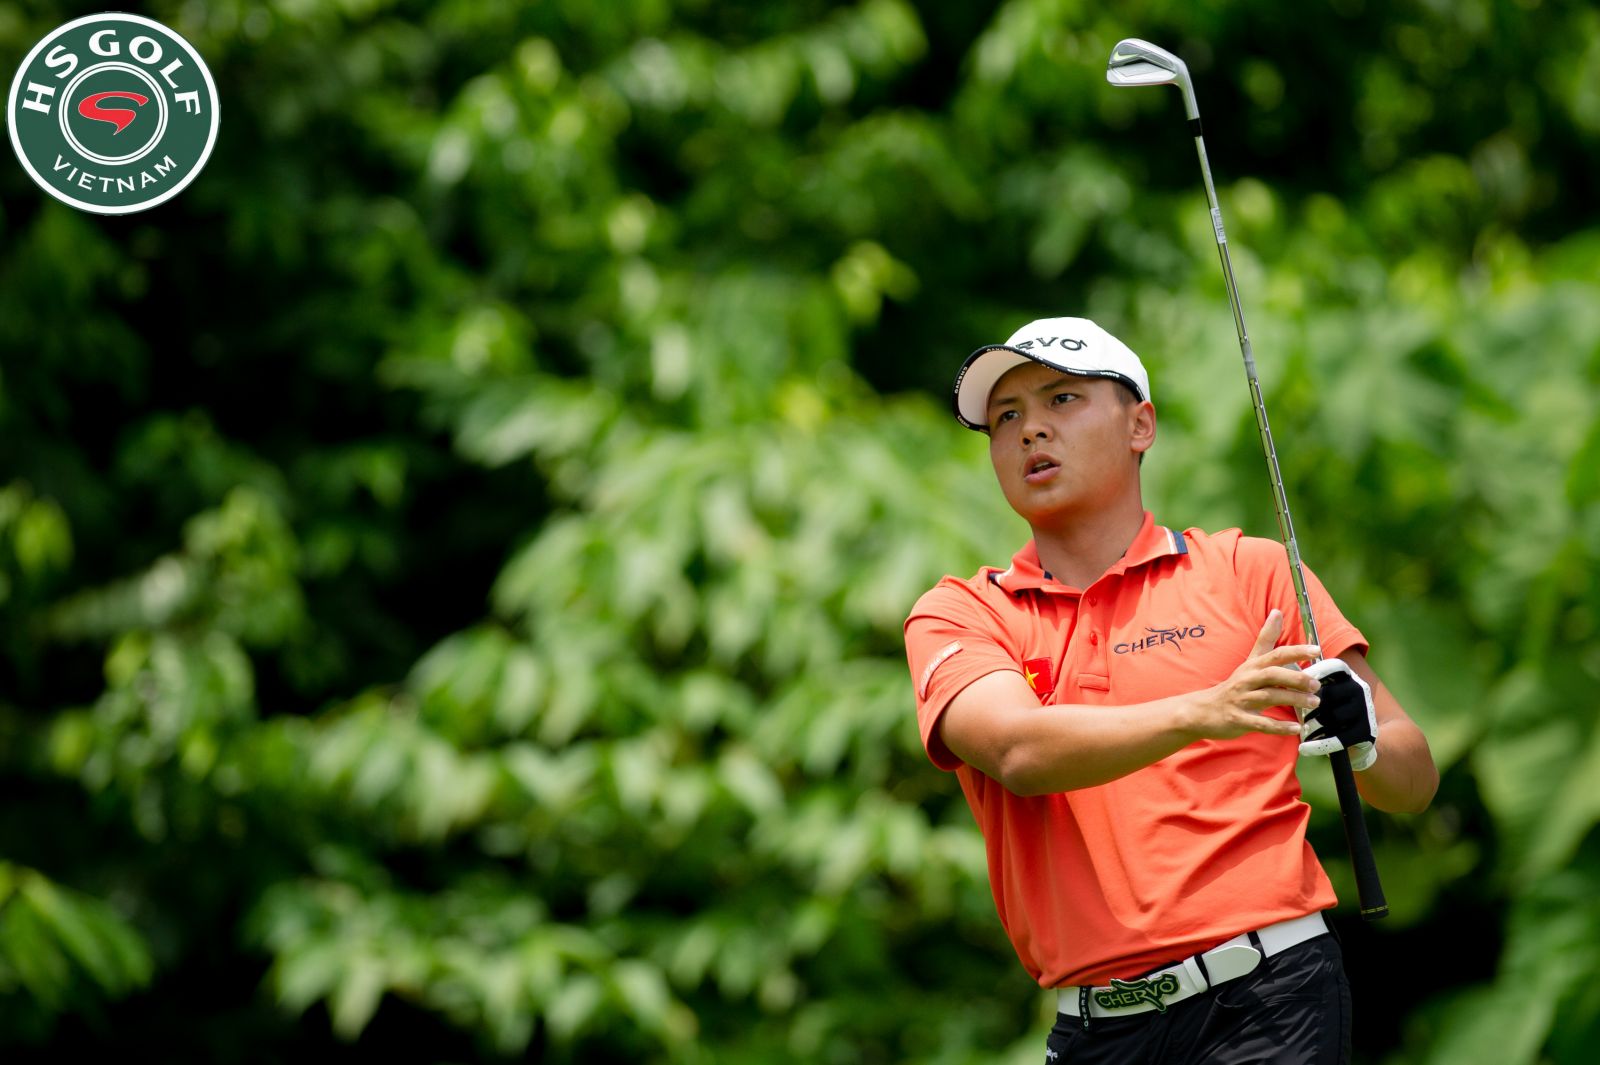 Do Le Gia Dat shot a even par 71 to finish first day of Sea Games 29